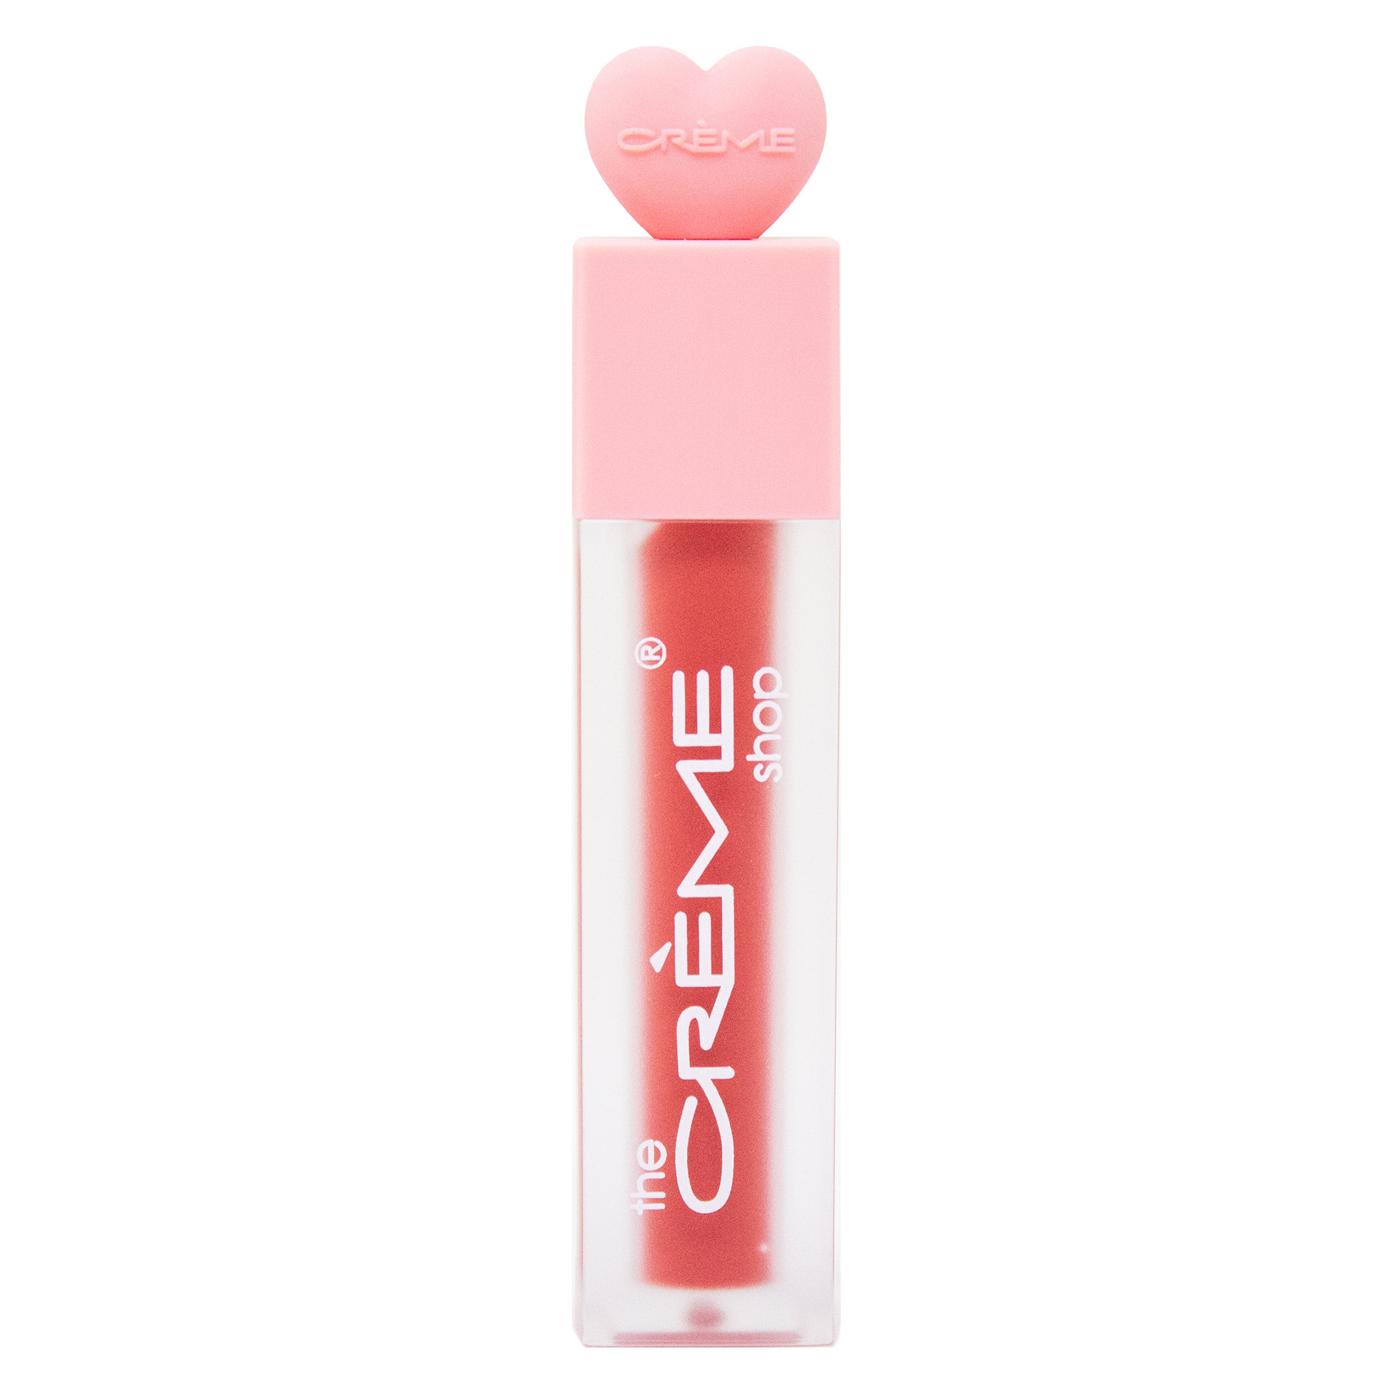 The Crème Shop Glossy 12 Hour Lip Stain - Teddy; image 2 of 2